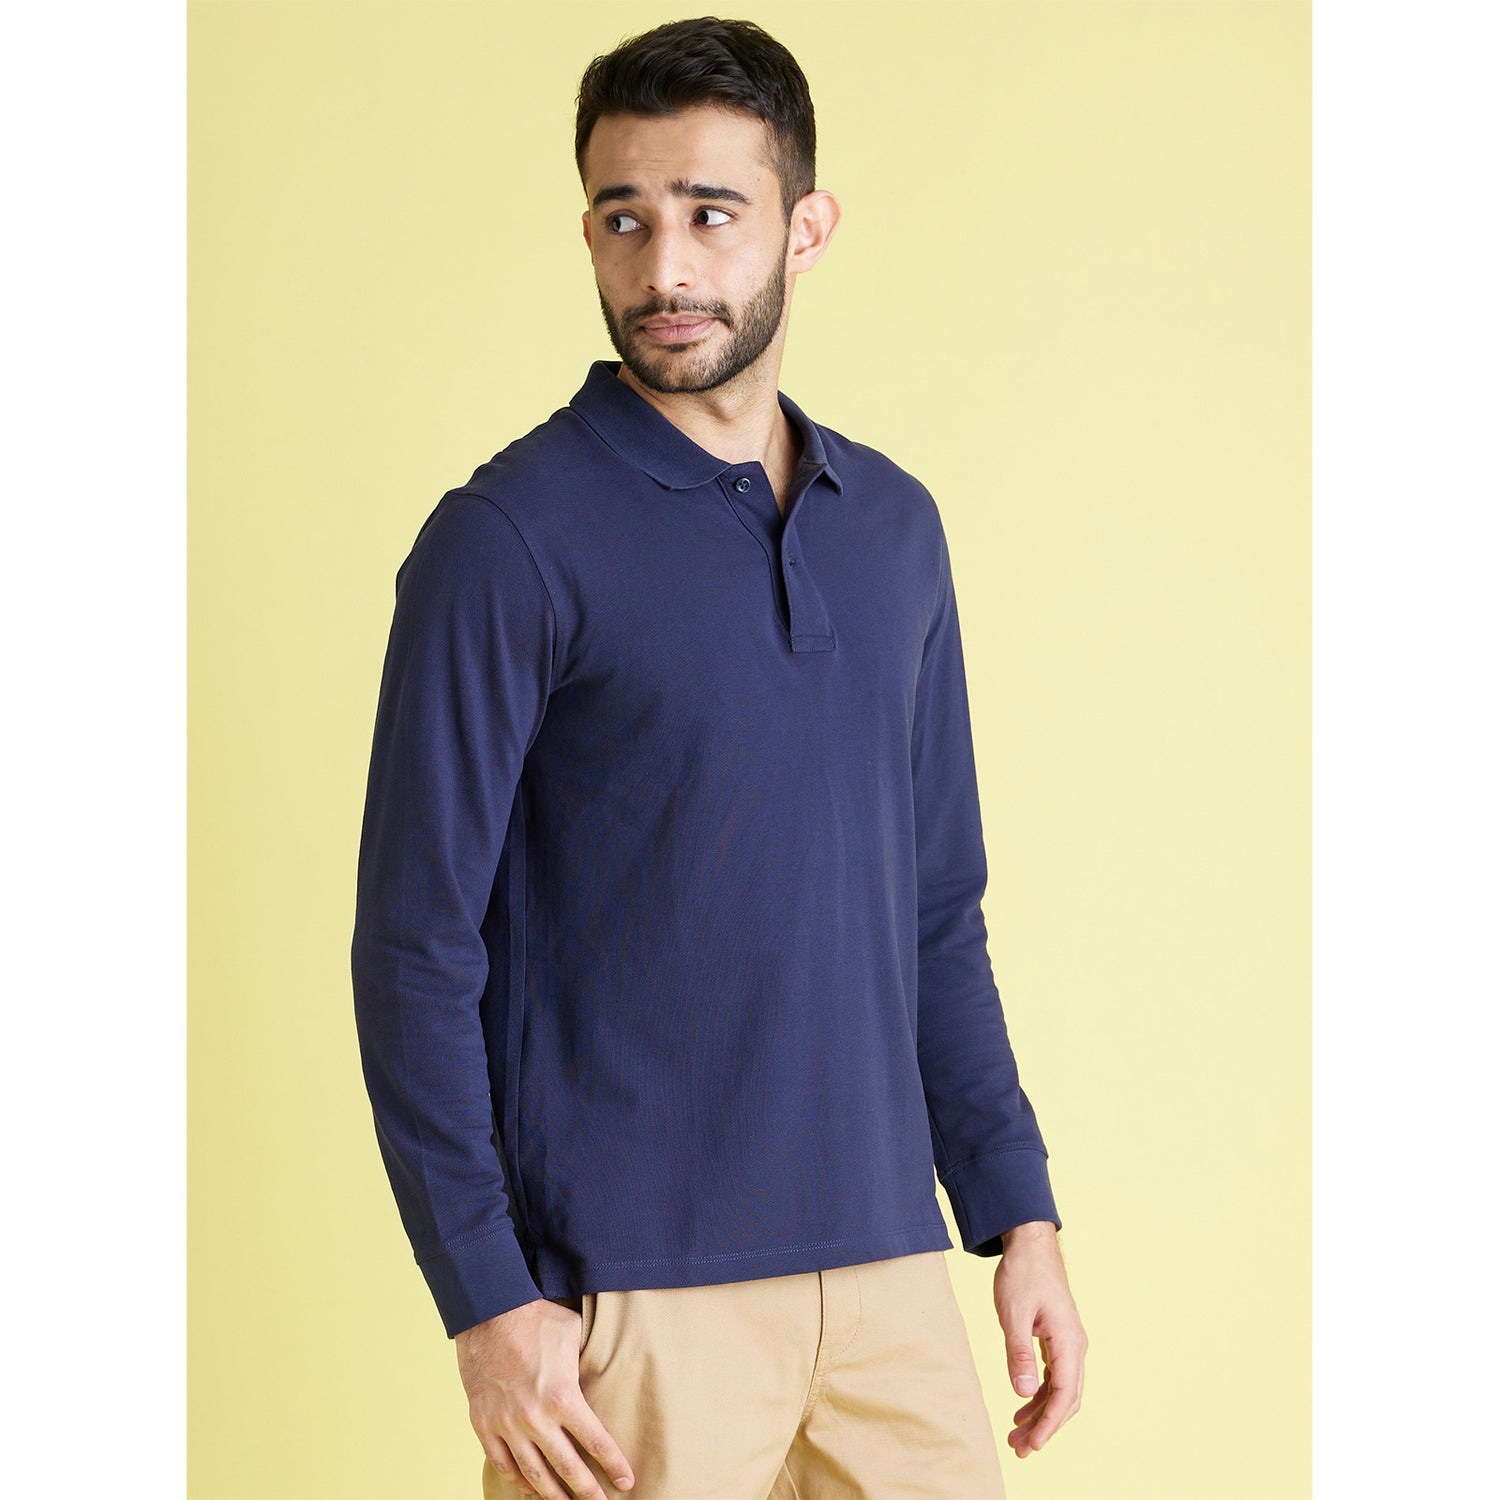 Navy Blue Polo Collar T-shirt (CEONEML)